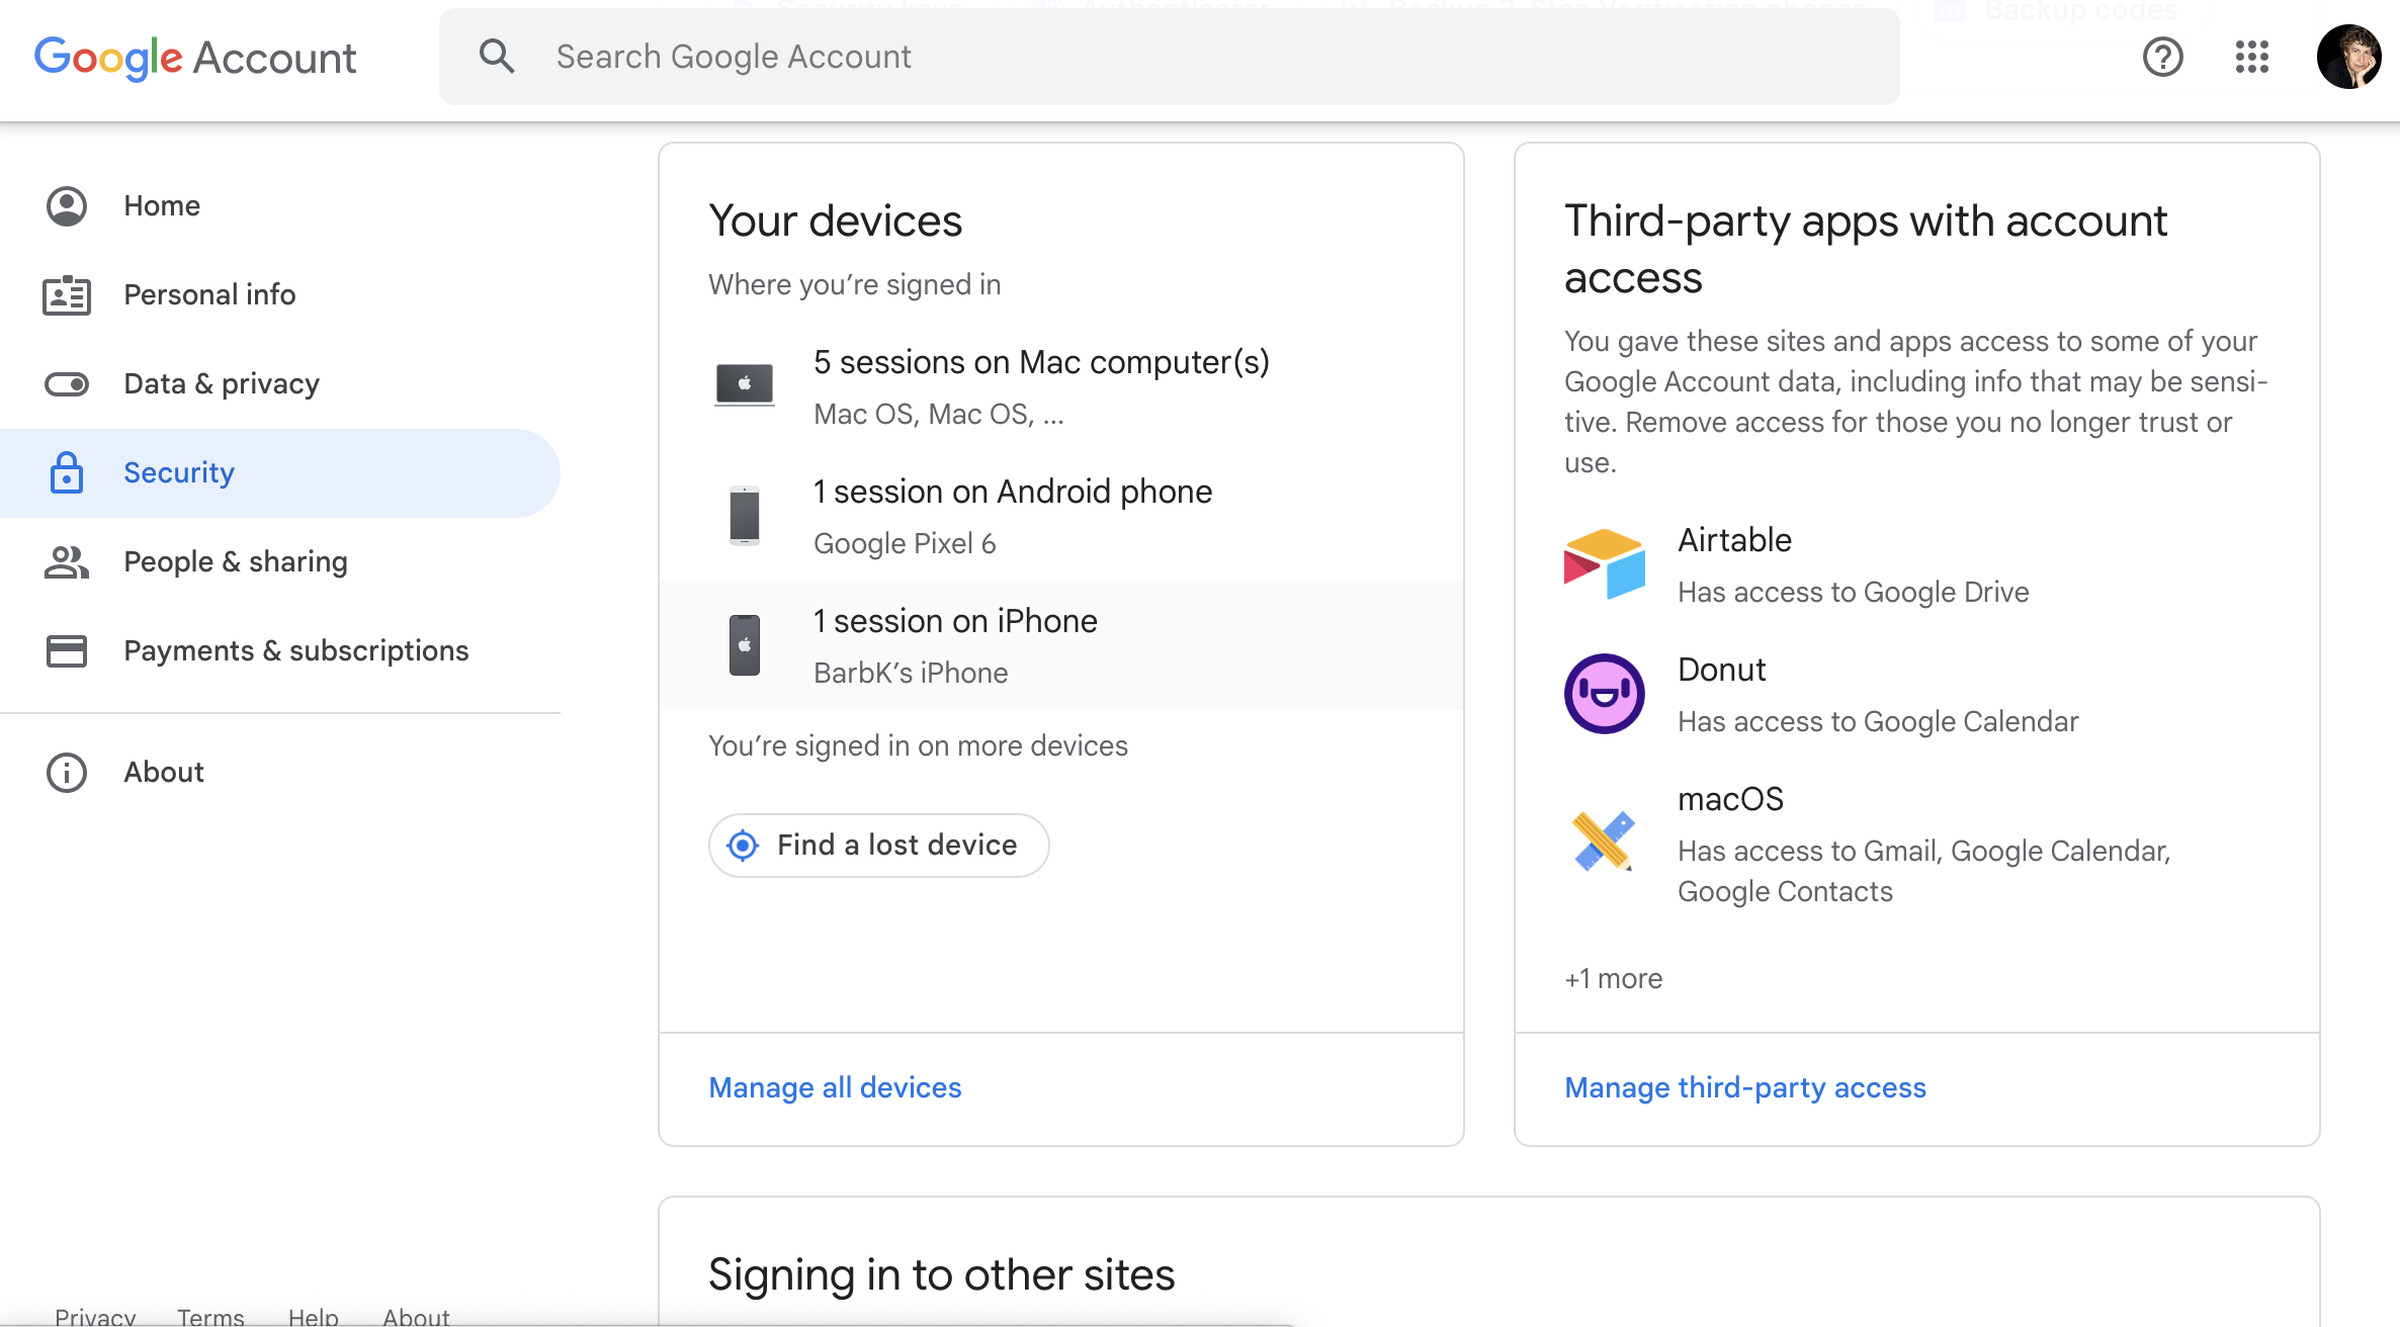 Google account page with search box in top center, menu on left side, list headed Your devices in center, and list headed Third-party apps with account accent on right.